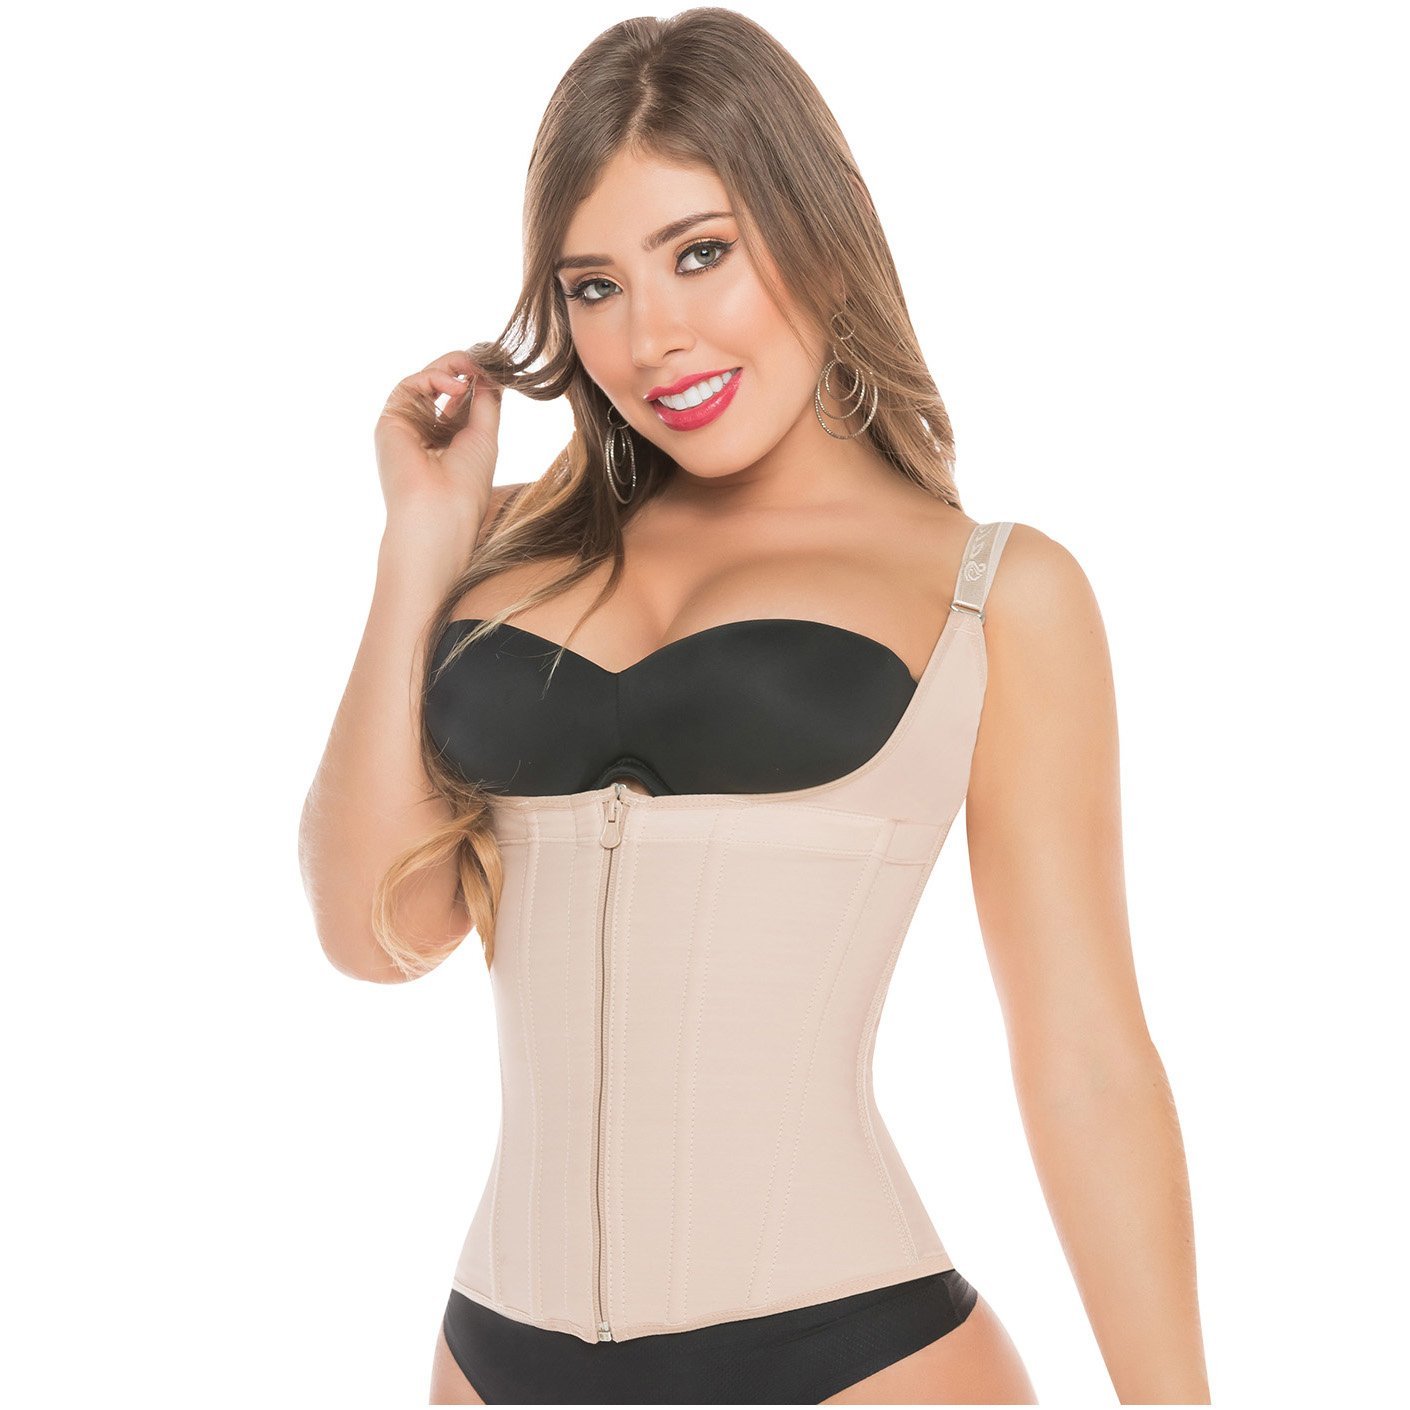 FAJAS SALOME 313 Colombian Body Shaper for Daily Use